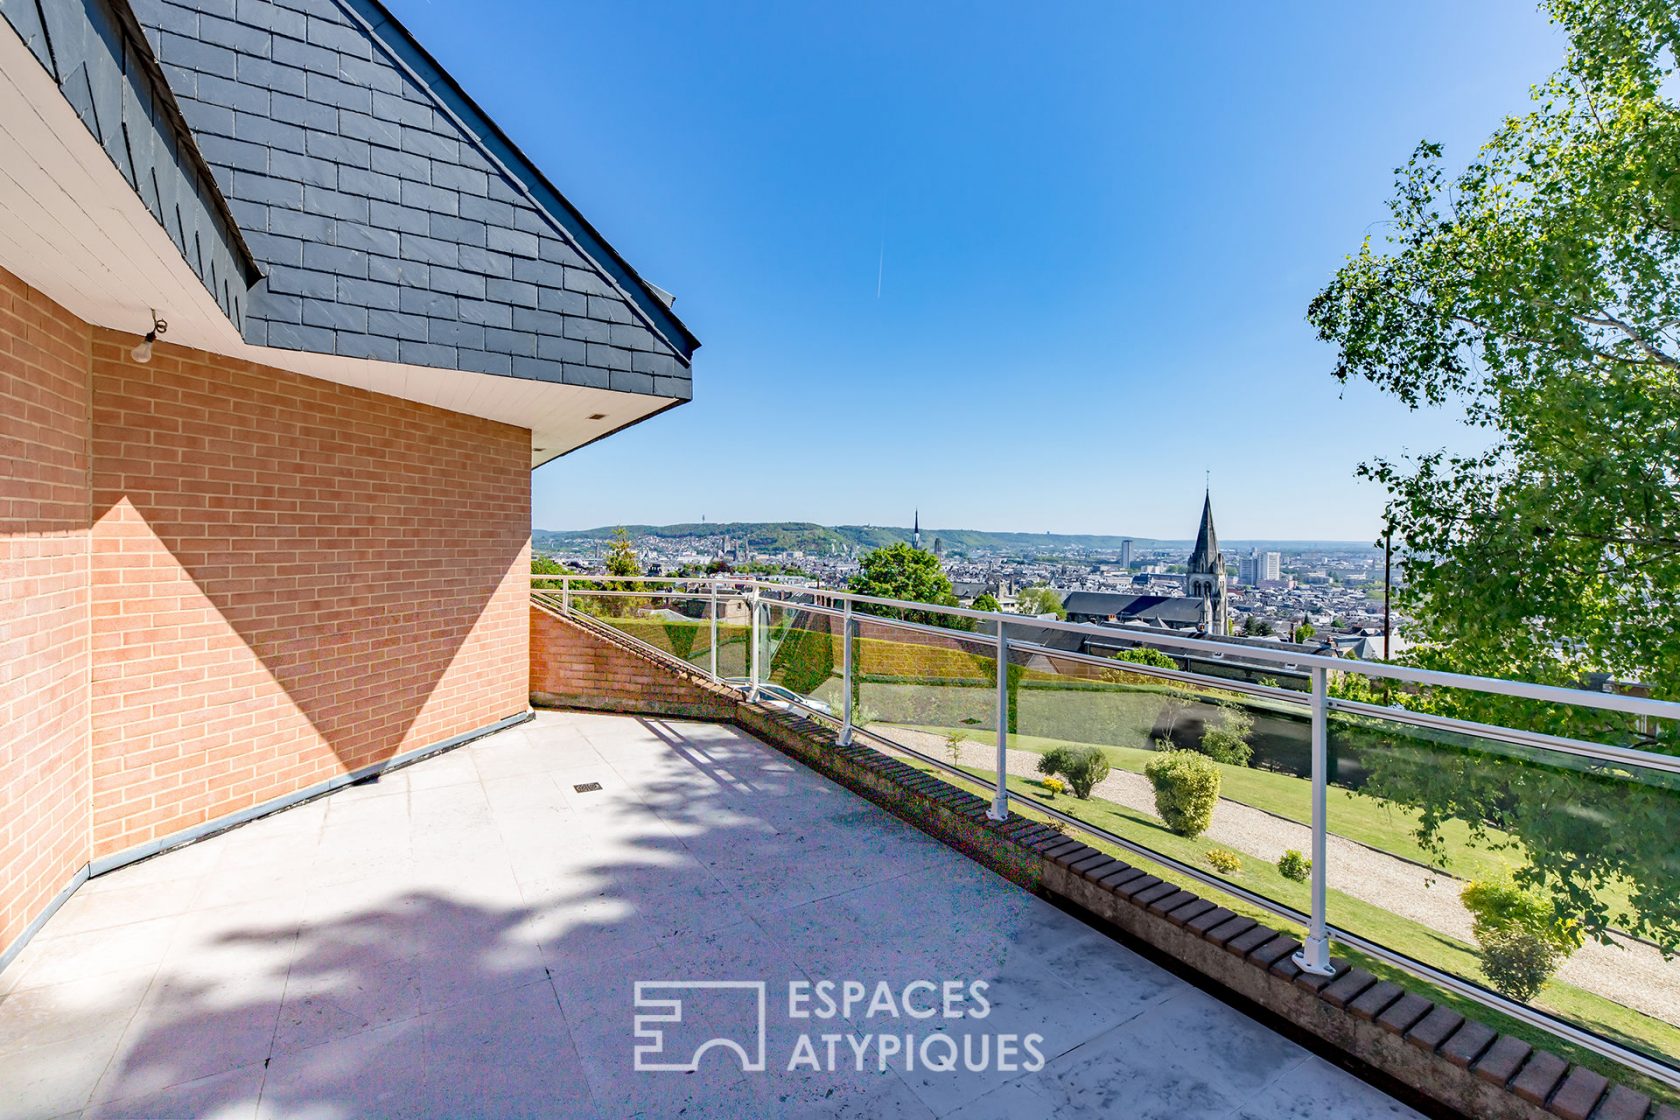 Contemporary house with panoramic views of Rouen